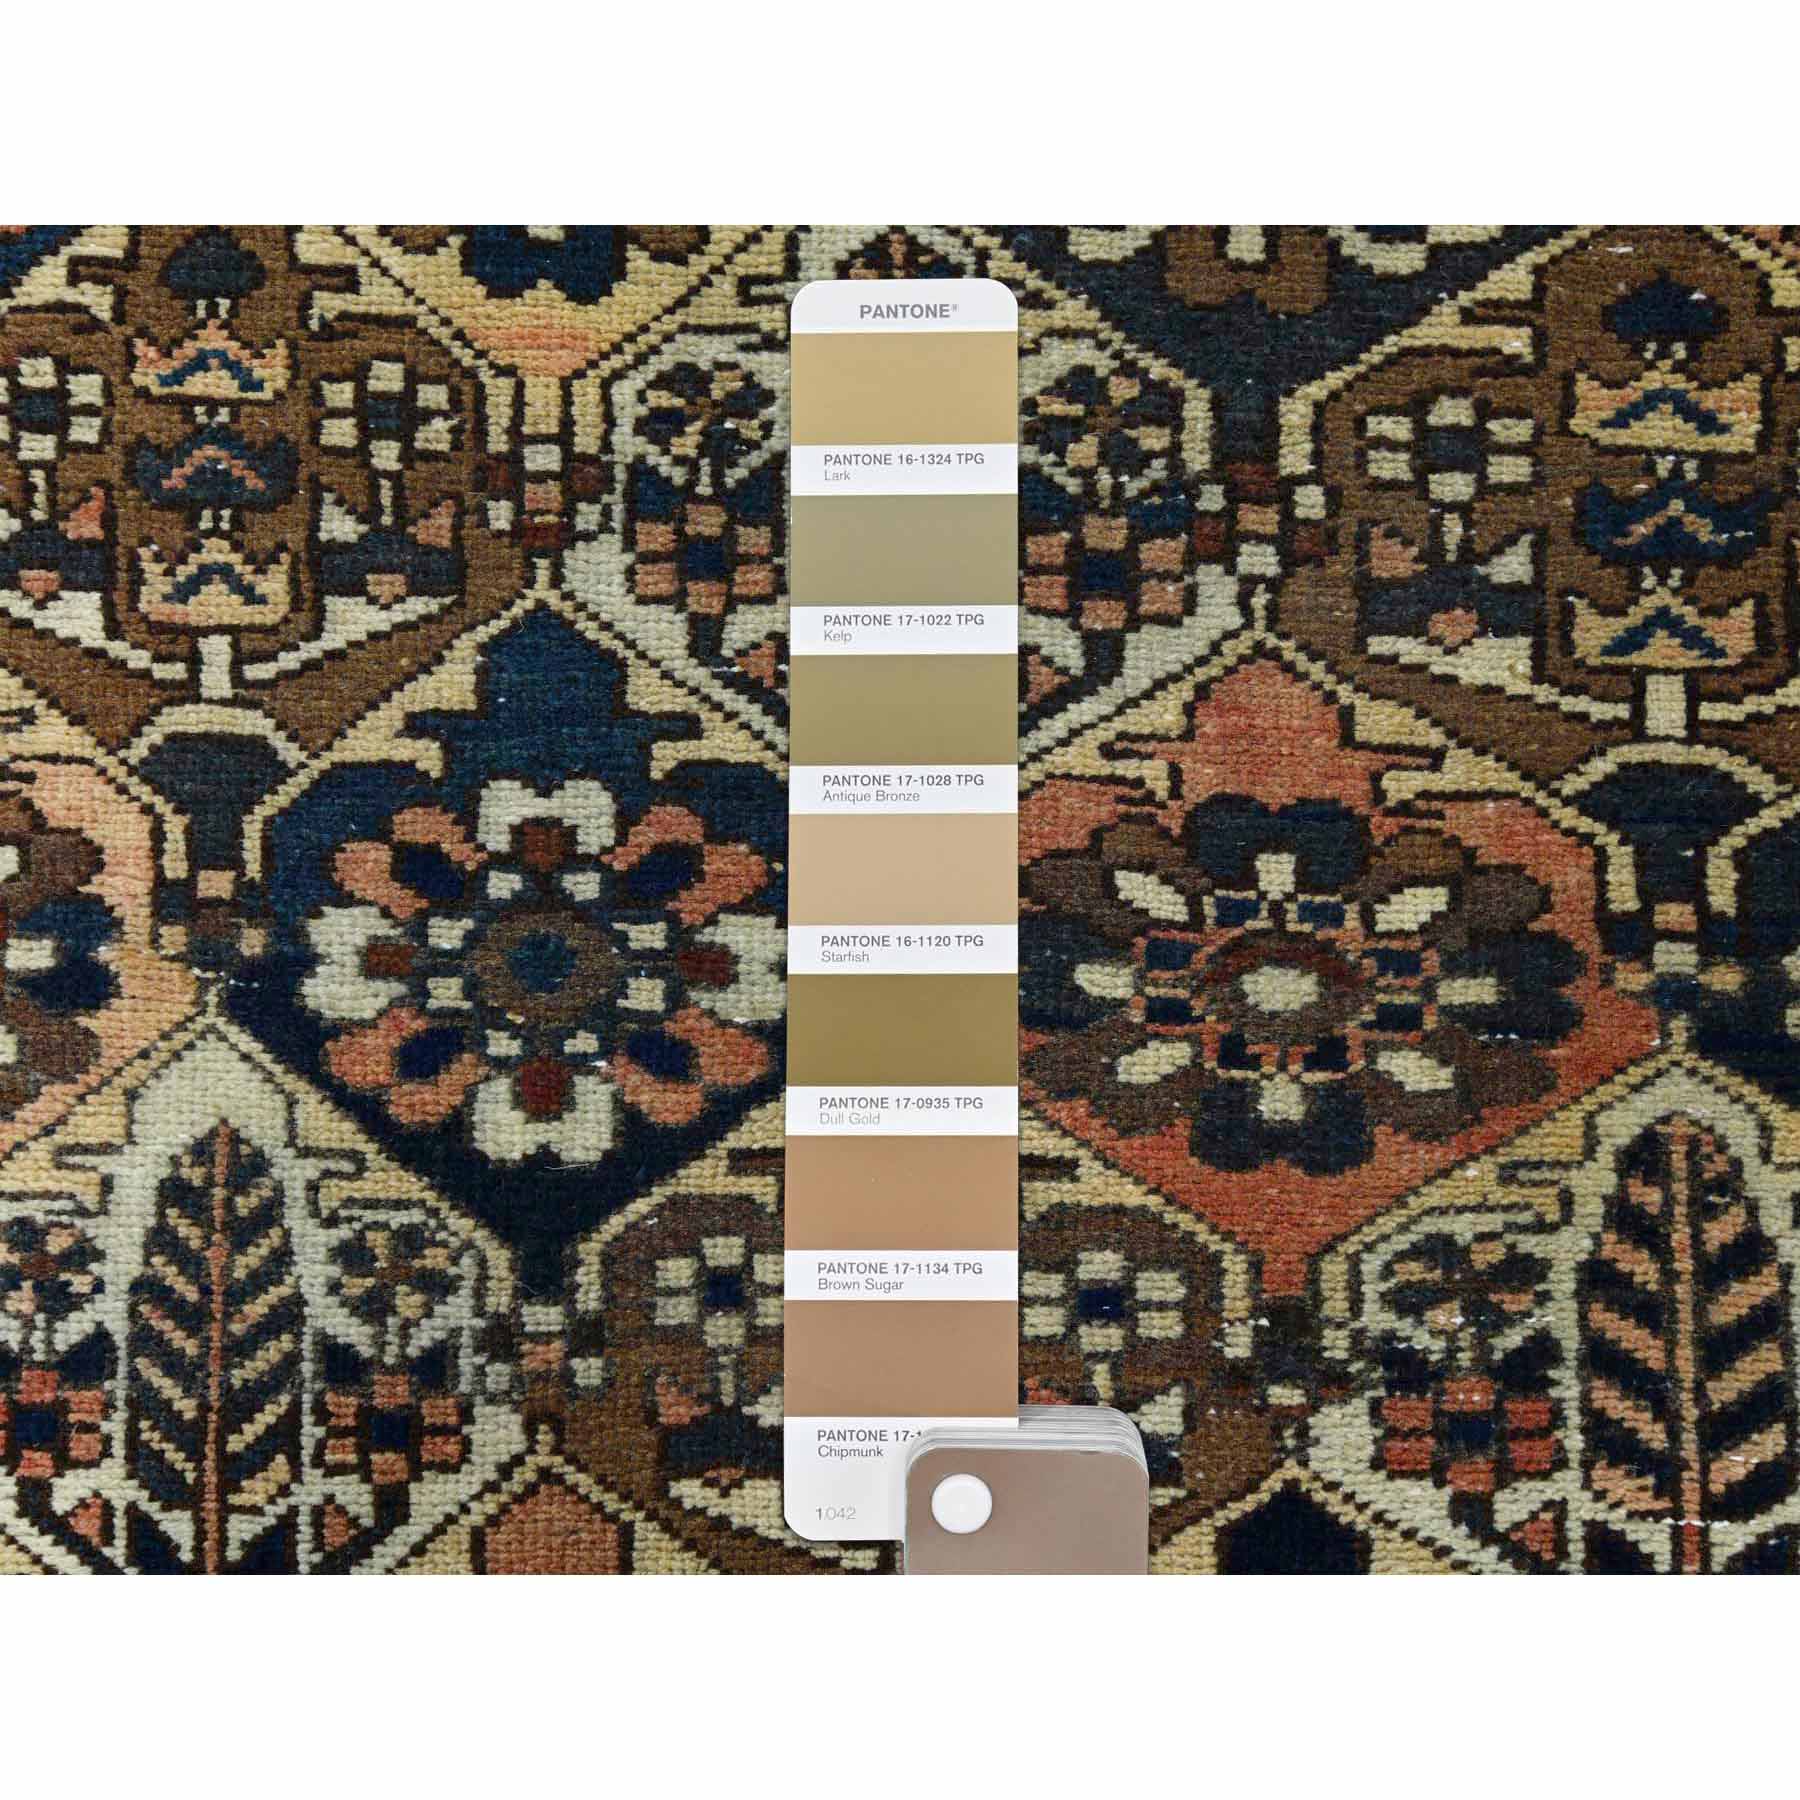 Overdyed-Vintage-Hand-Knotted-Rug-405095